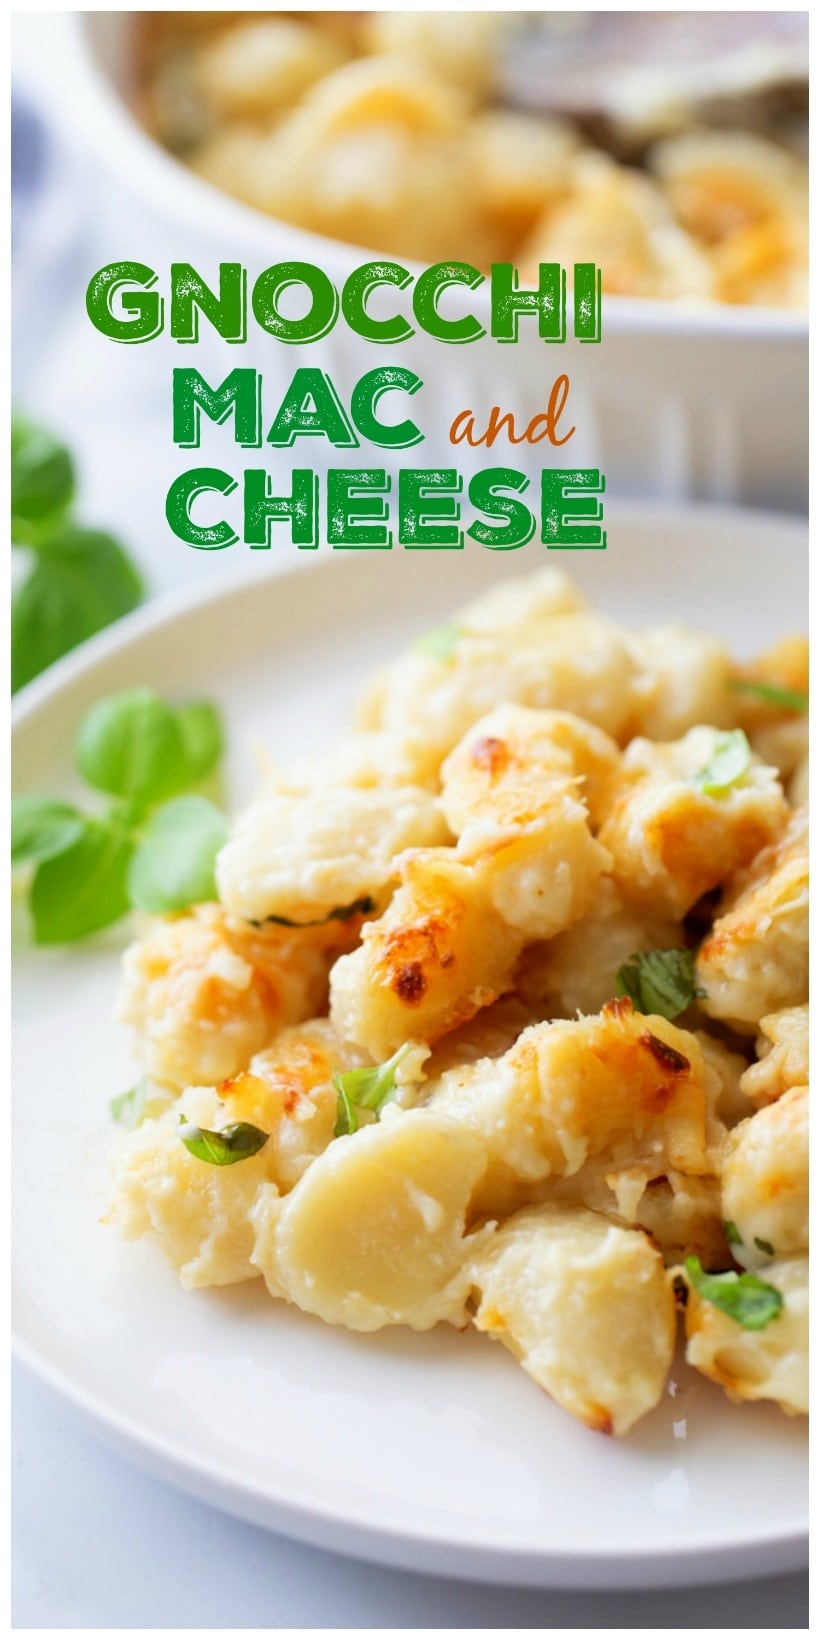 Gnocchi mac and cheese in text with gnocchi on a plate and in a serving dish.